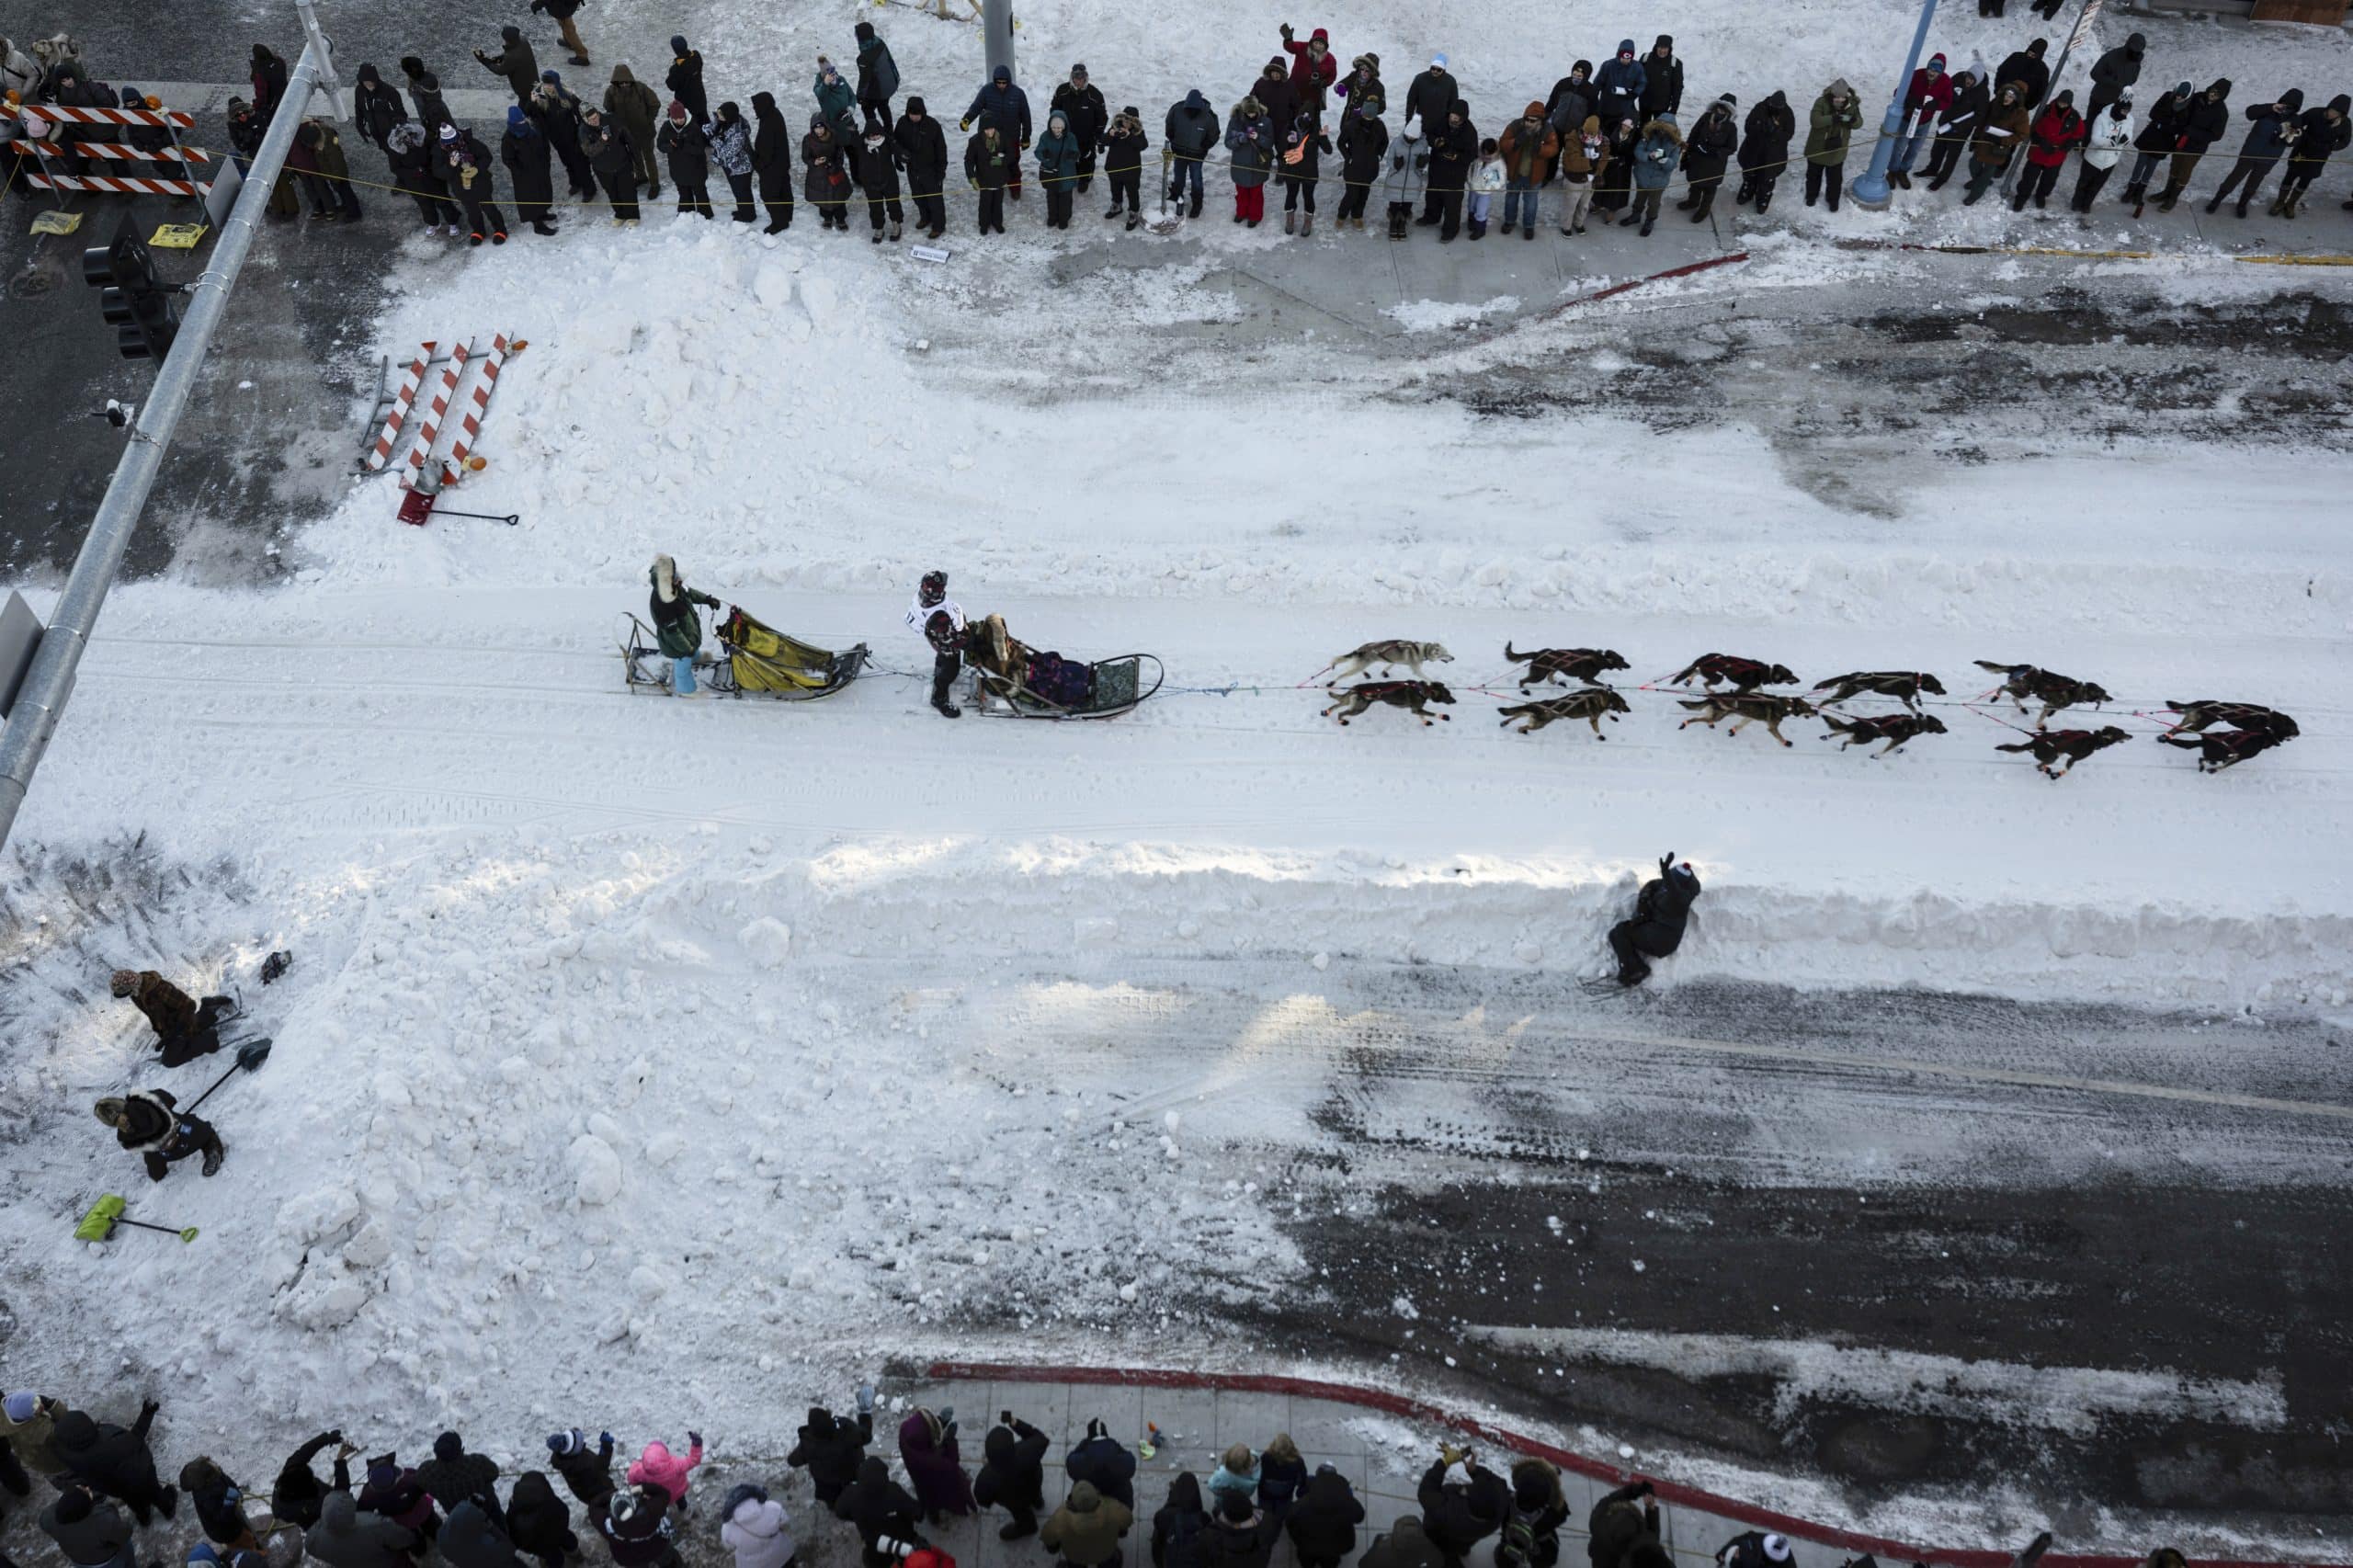 Dog deaths revive calls for end to Iditarod, the endurance race with deep roots in Alaska